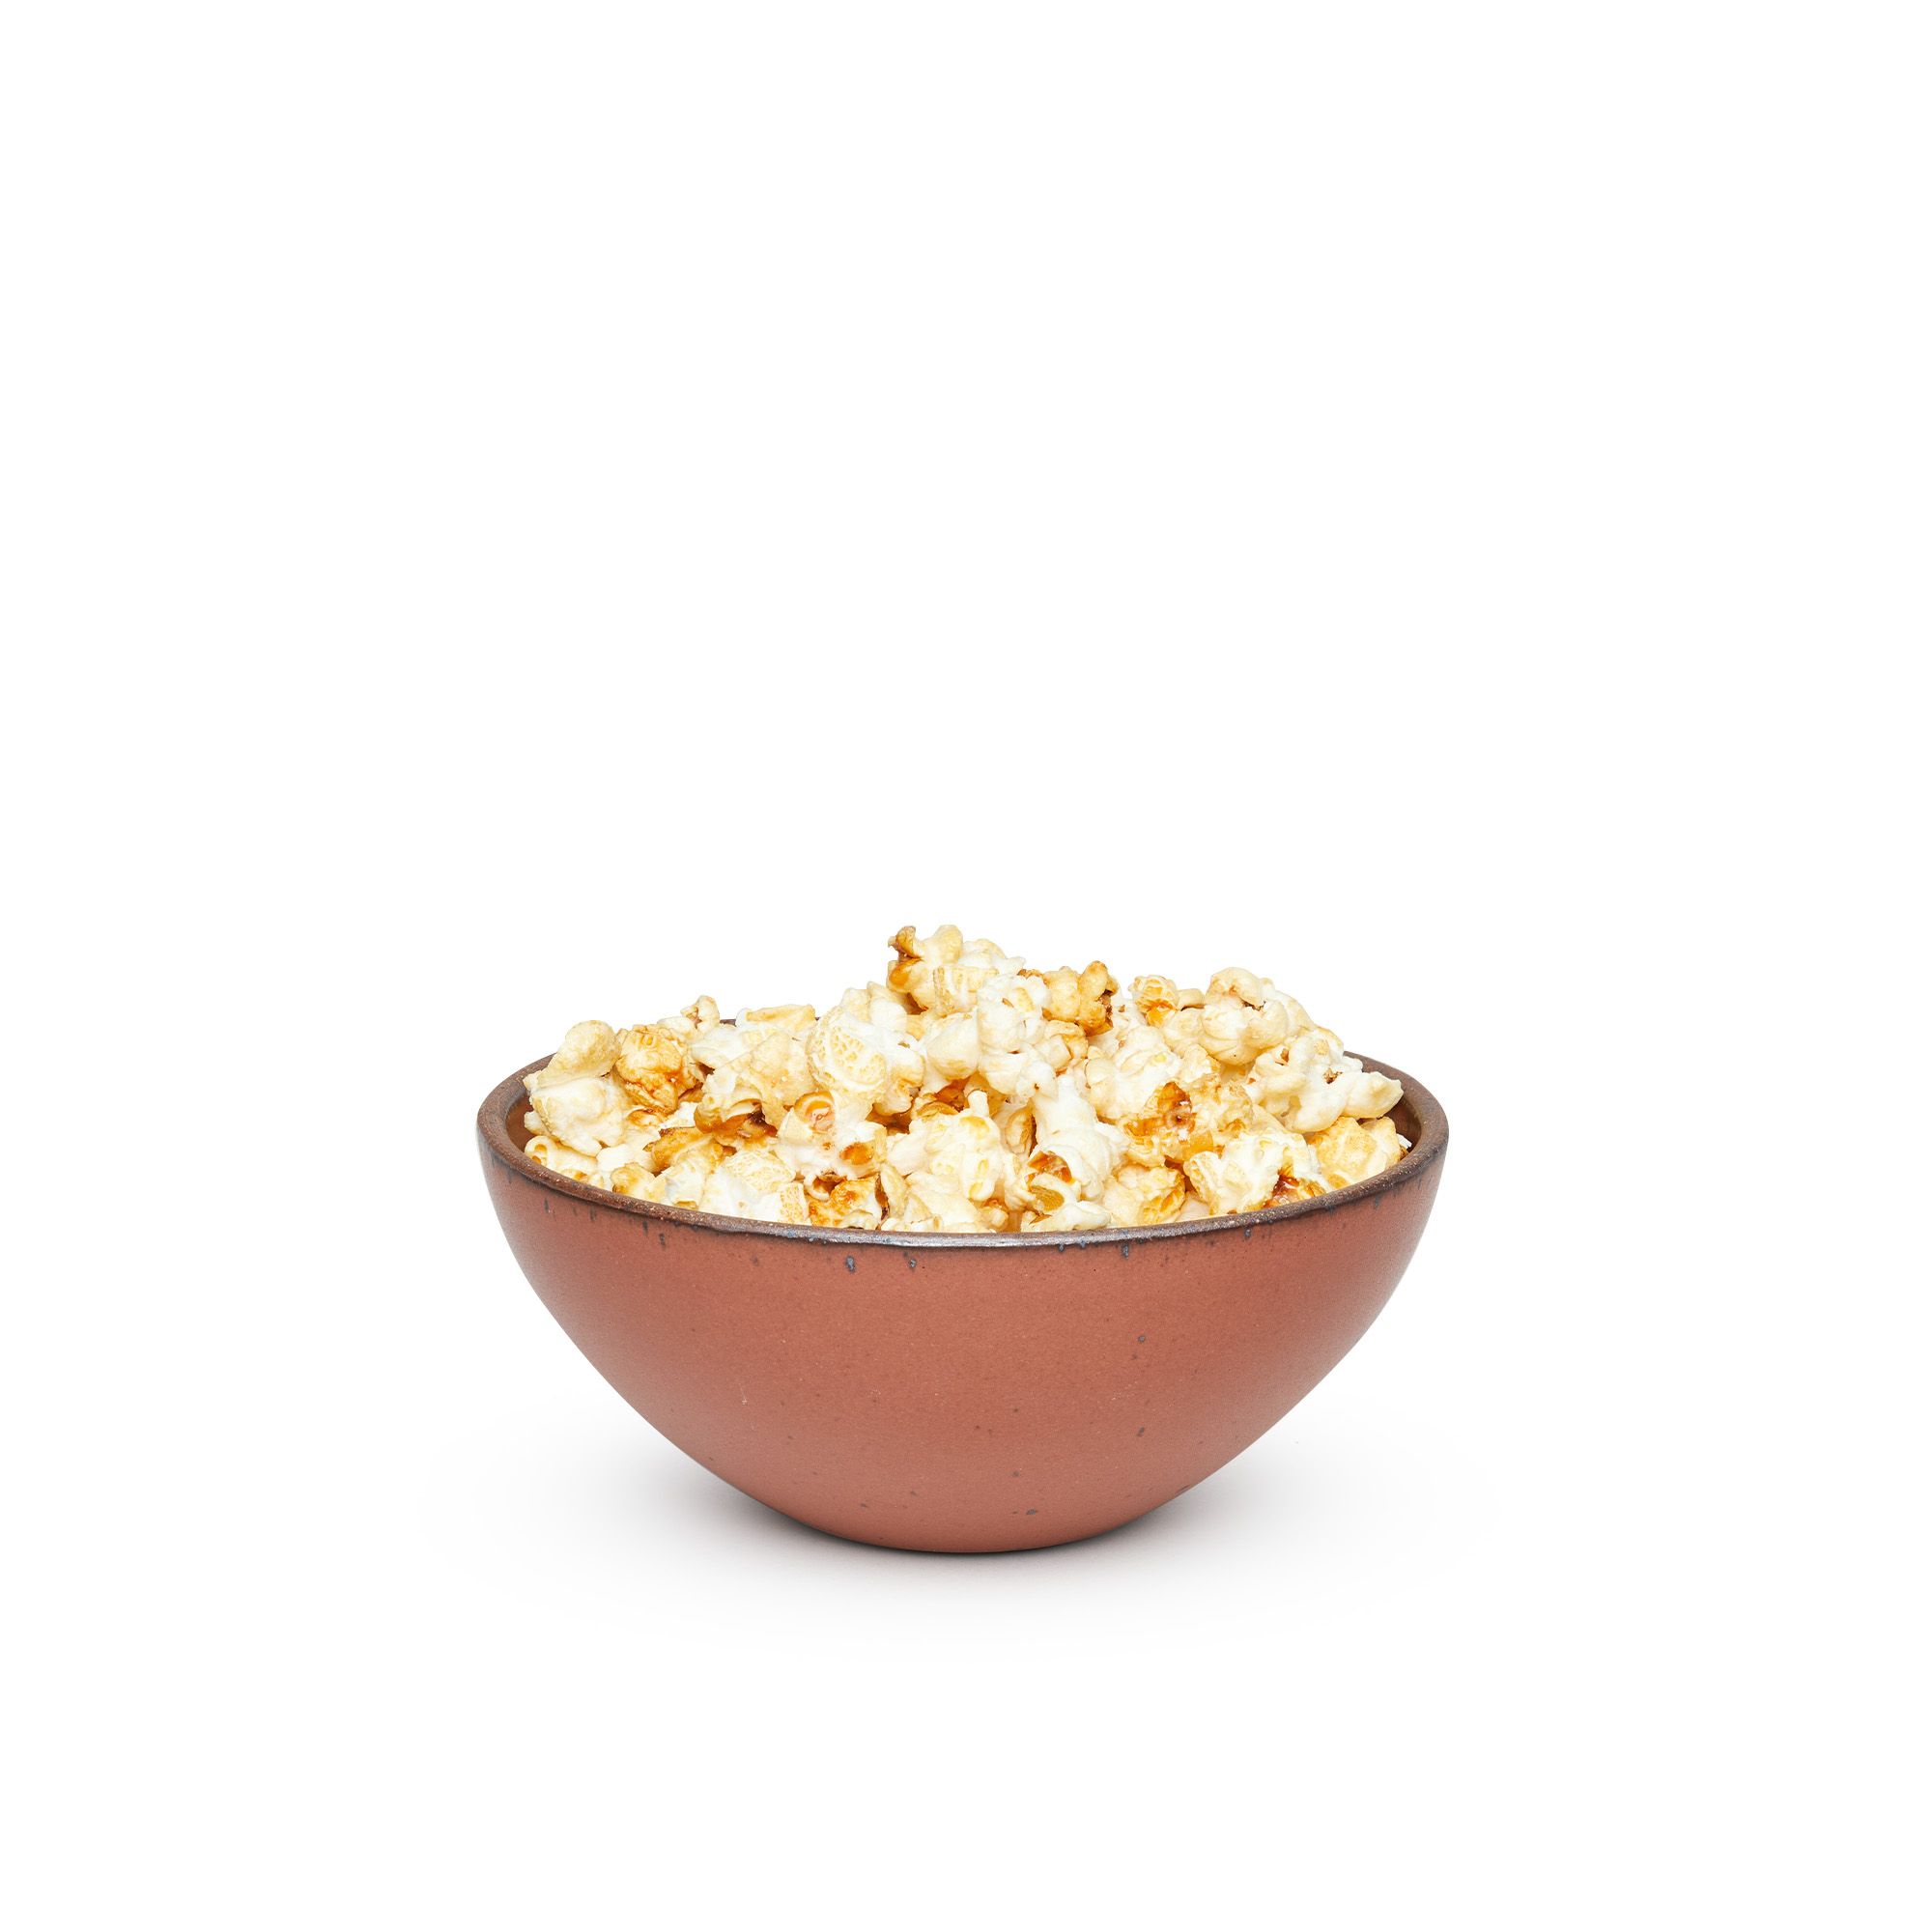 A medium rounded ceramic bowl in a cool burnt terracotta color featuring iron speckles and an unglazed rim, filled with popcorn